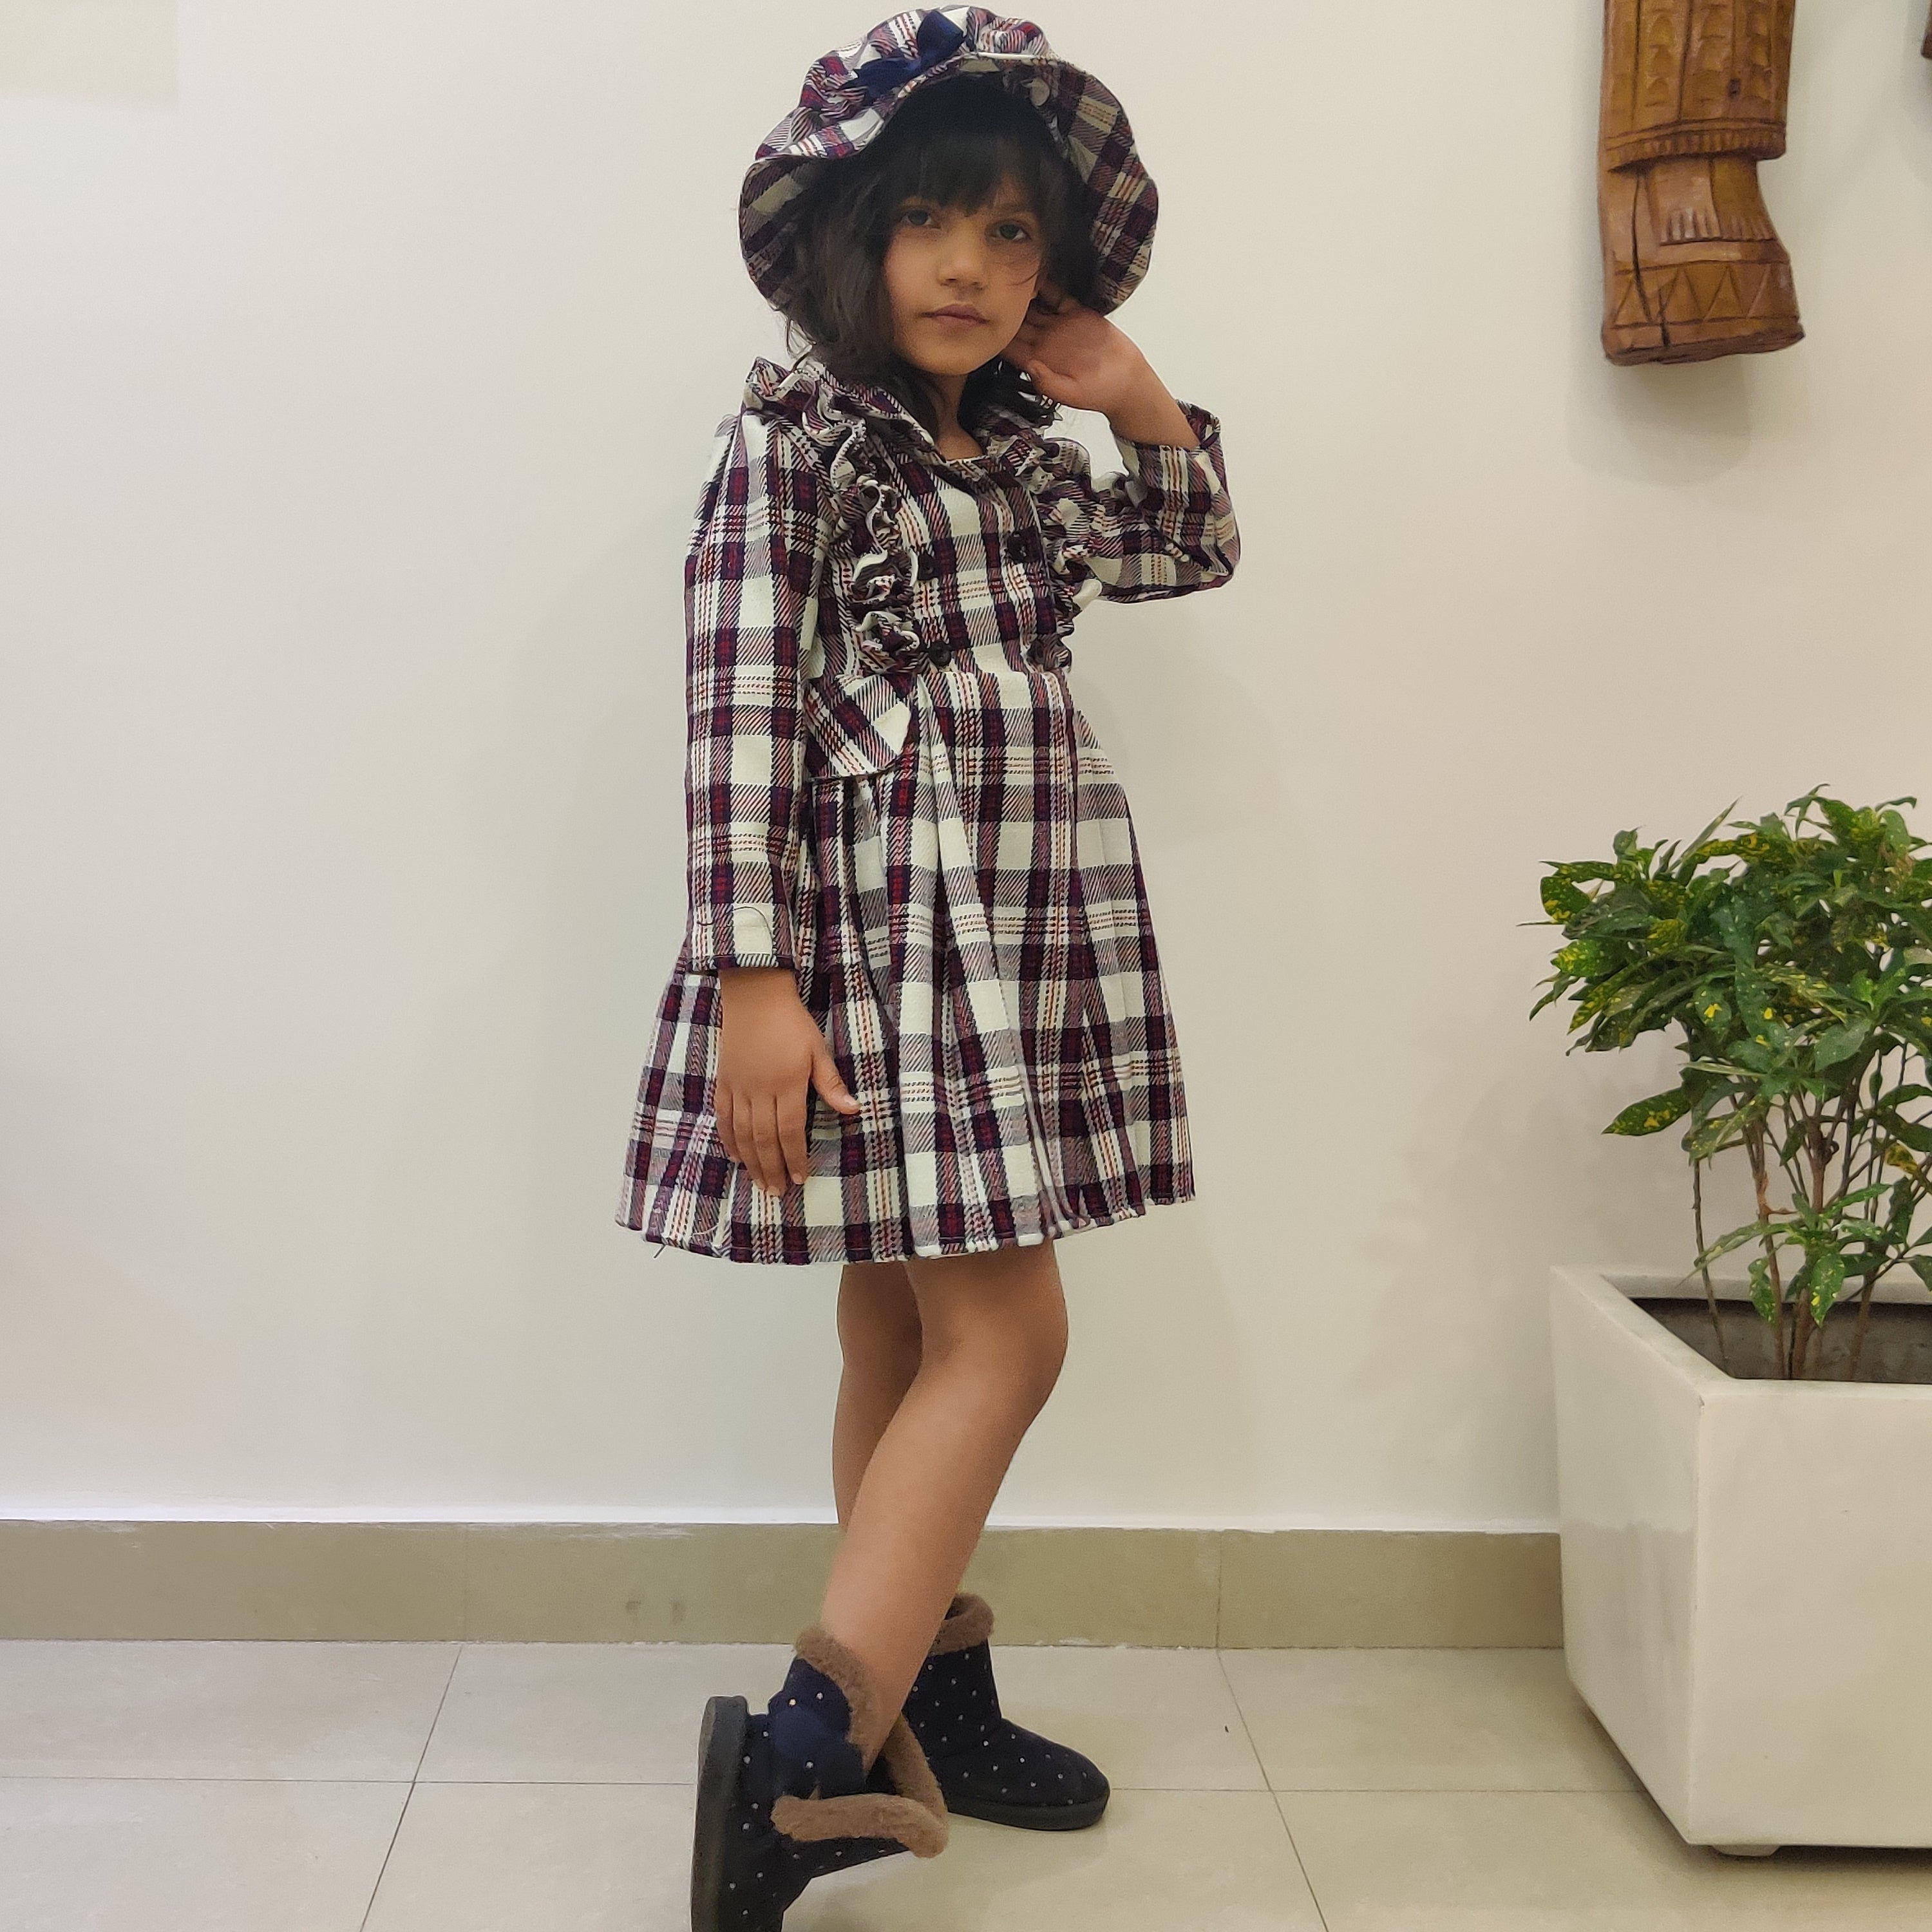 Accessorizing Styles With J. Winter Dresses For Girls